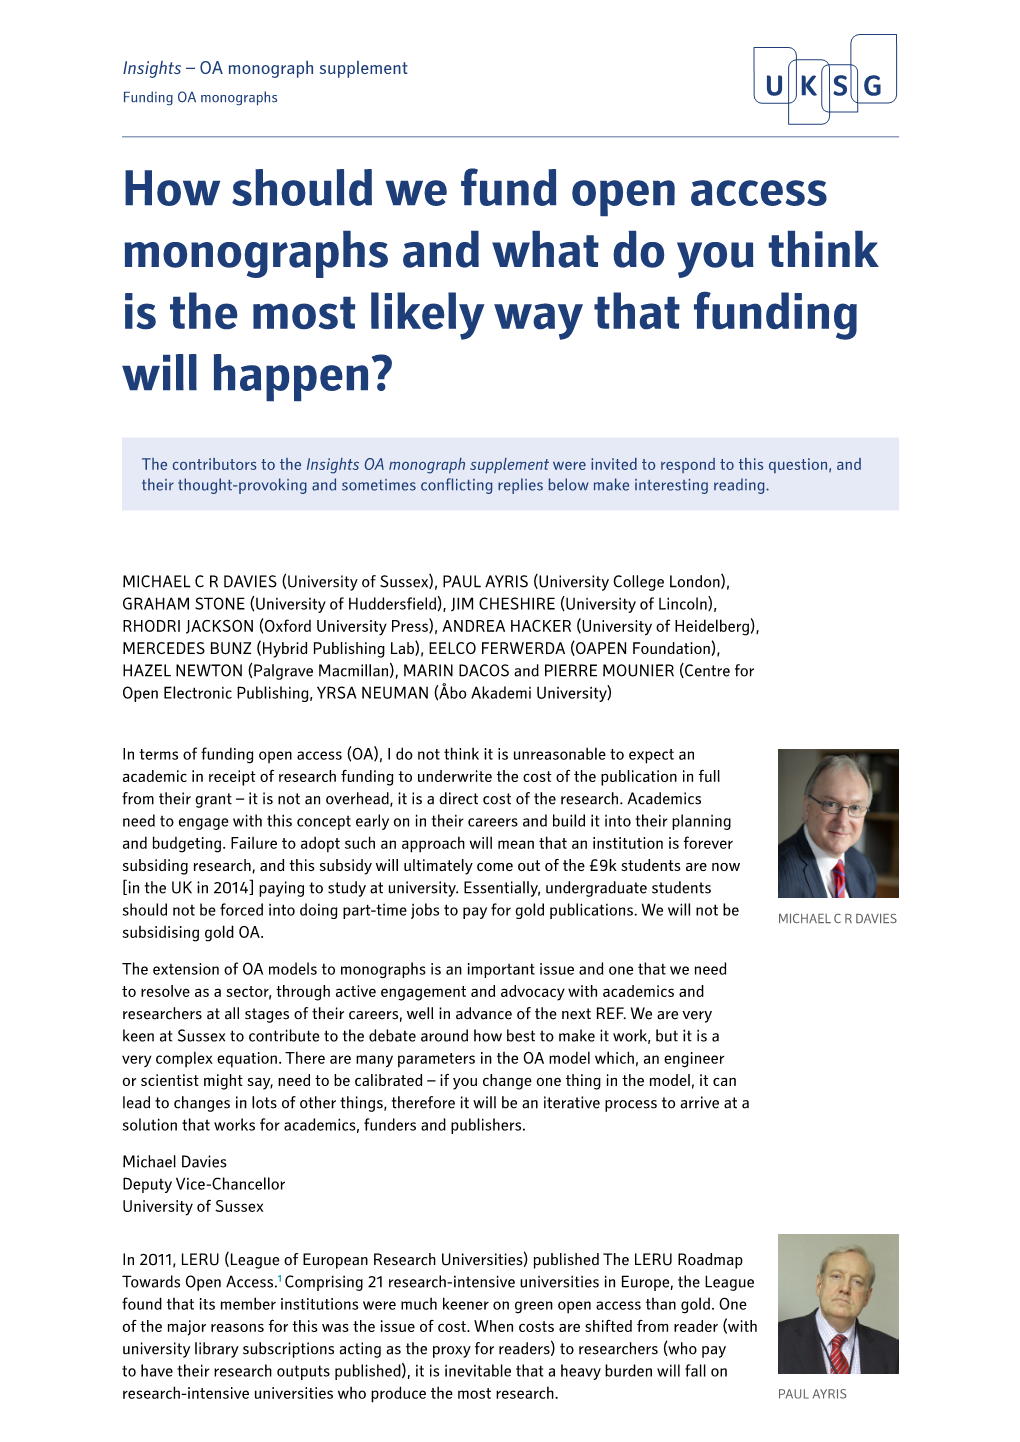 How Should We Fund Open Access Monographs and What Do You Think Is the Most Likely Way That Funding Will Happen?